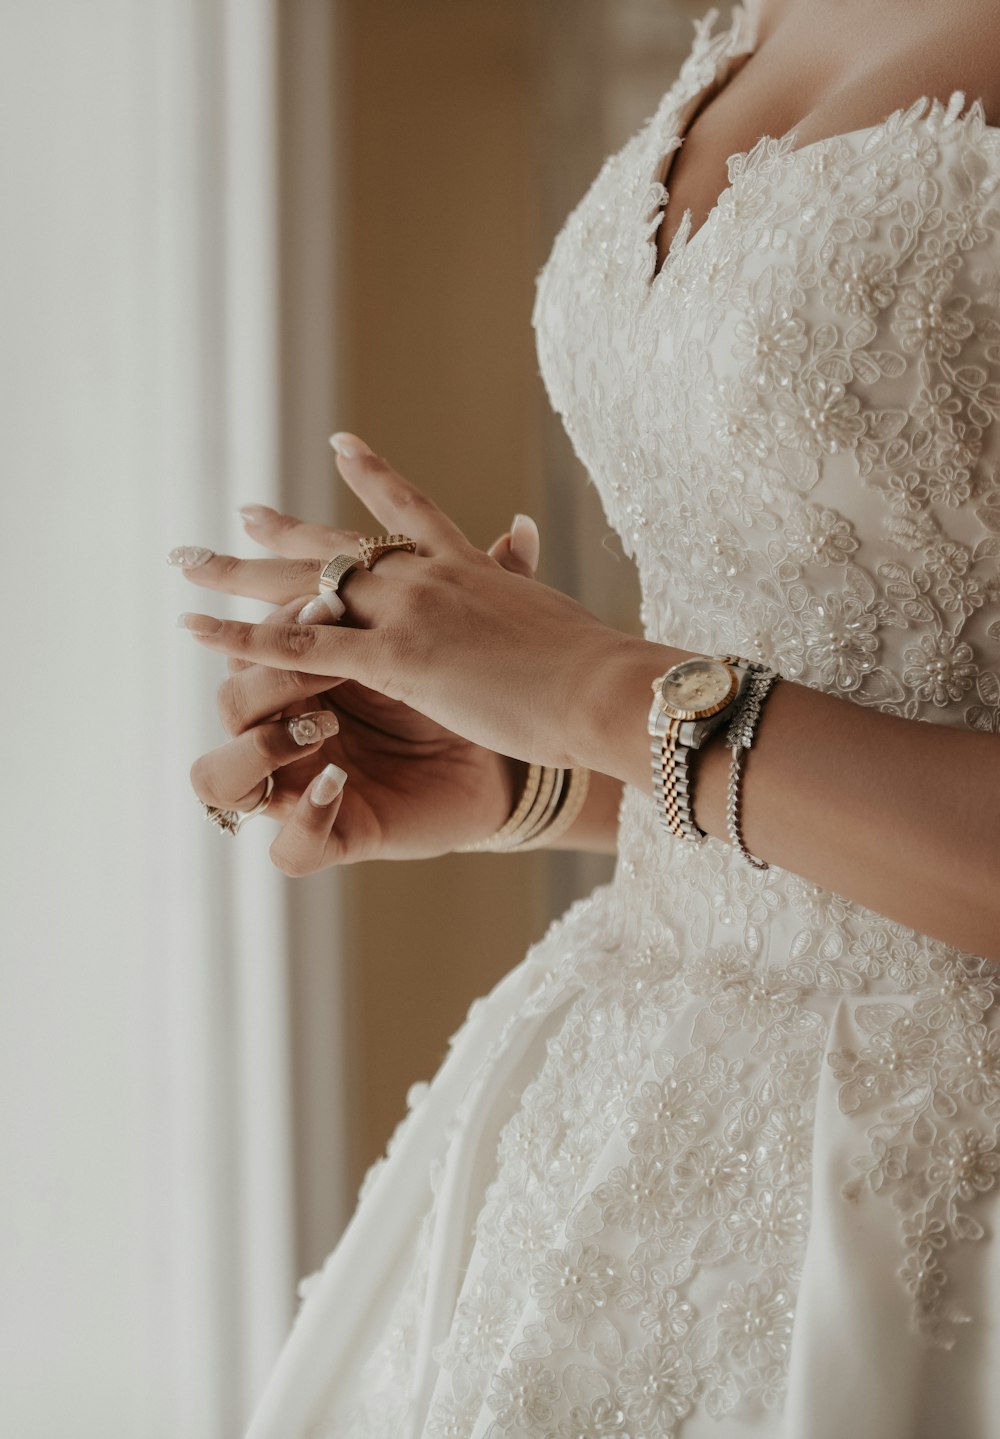 a woman in a wedding dress putting on her wedding ring